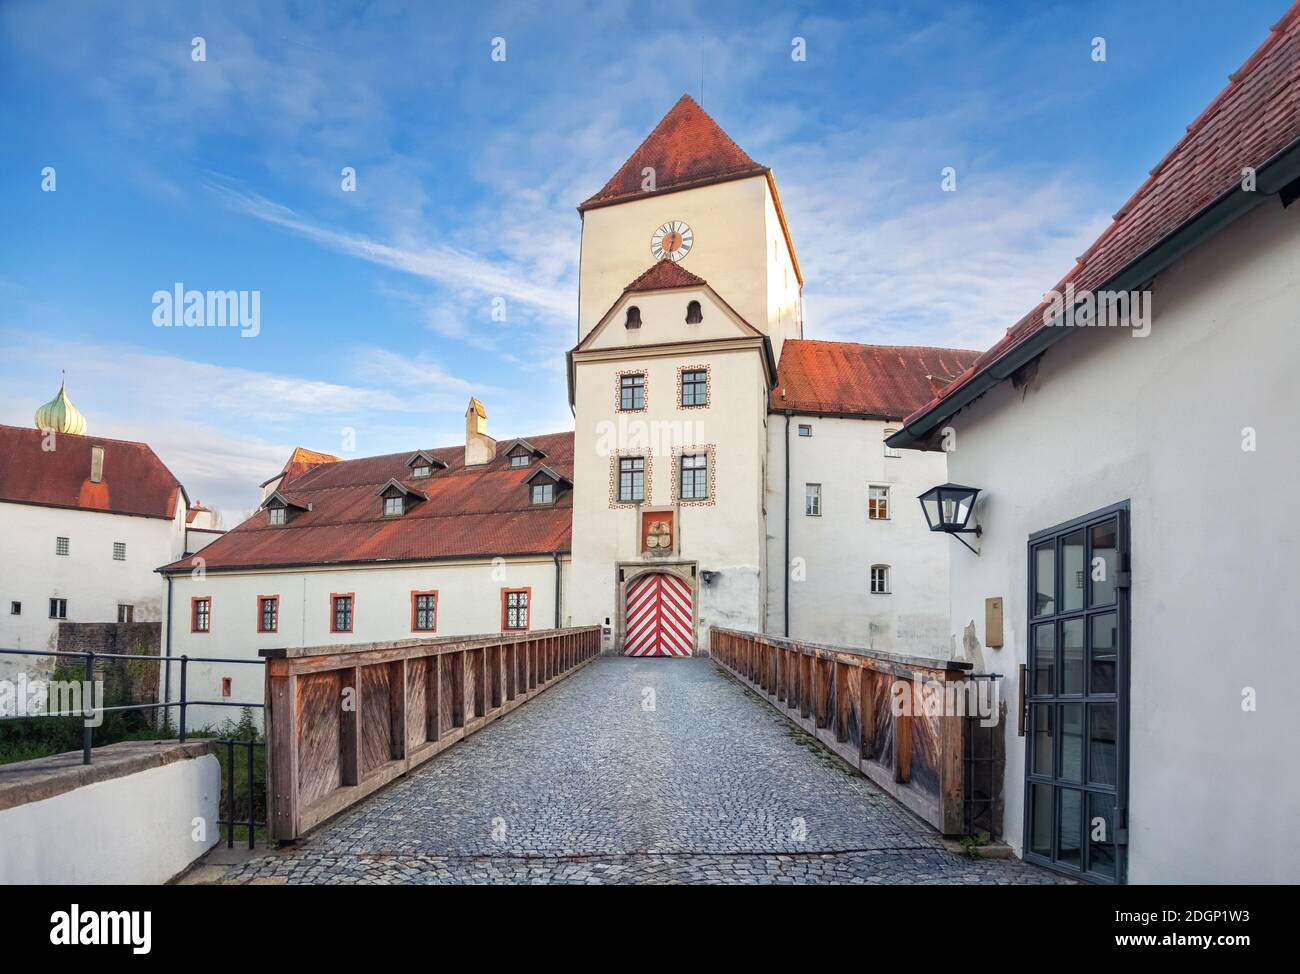 Passau, Germany. Bridge and entrance gate to Veste Oberhaus fortress founded in 1219 Stock Photo